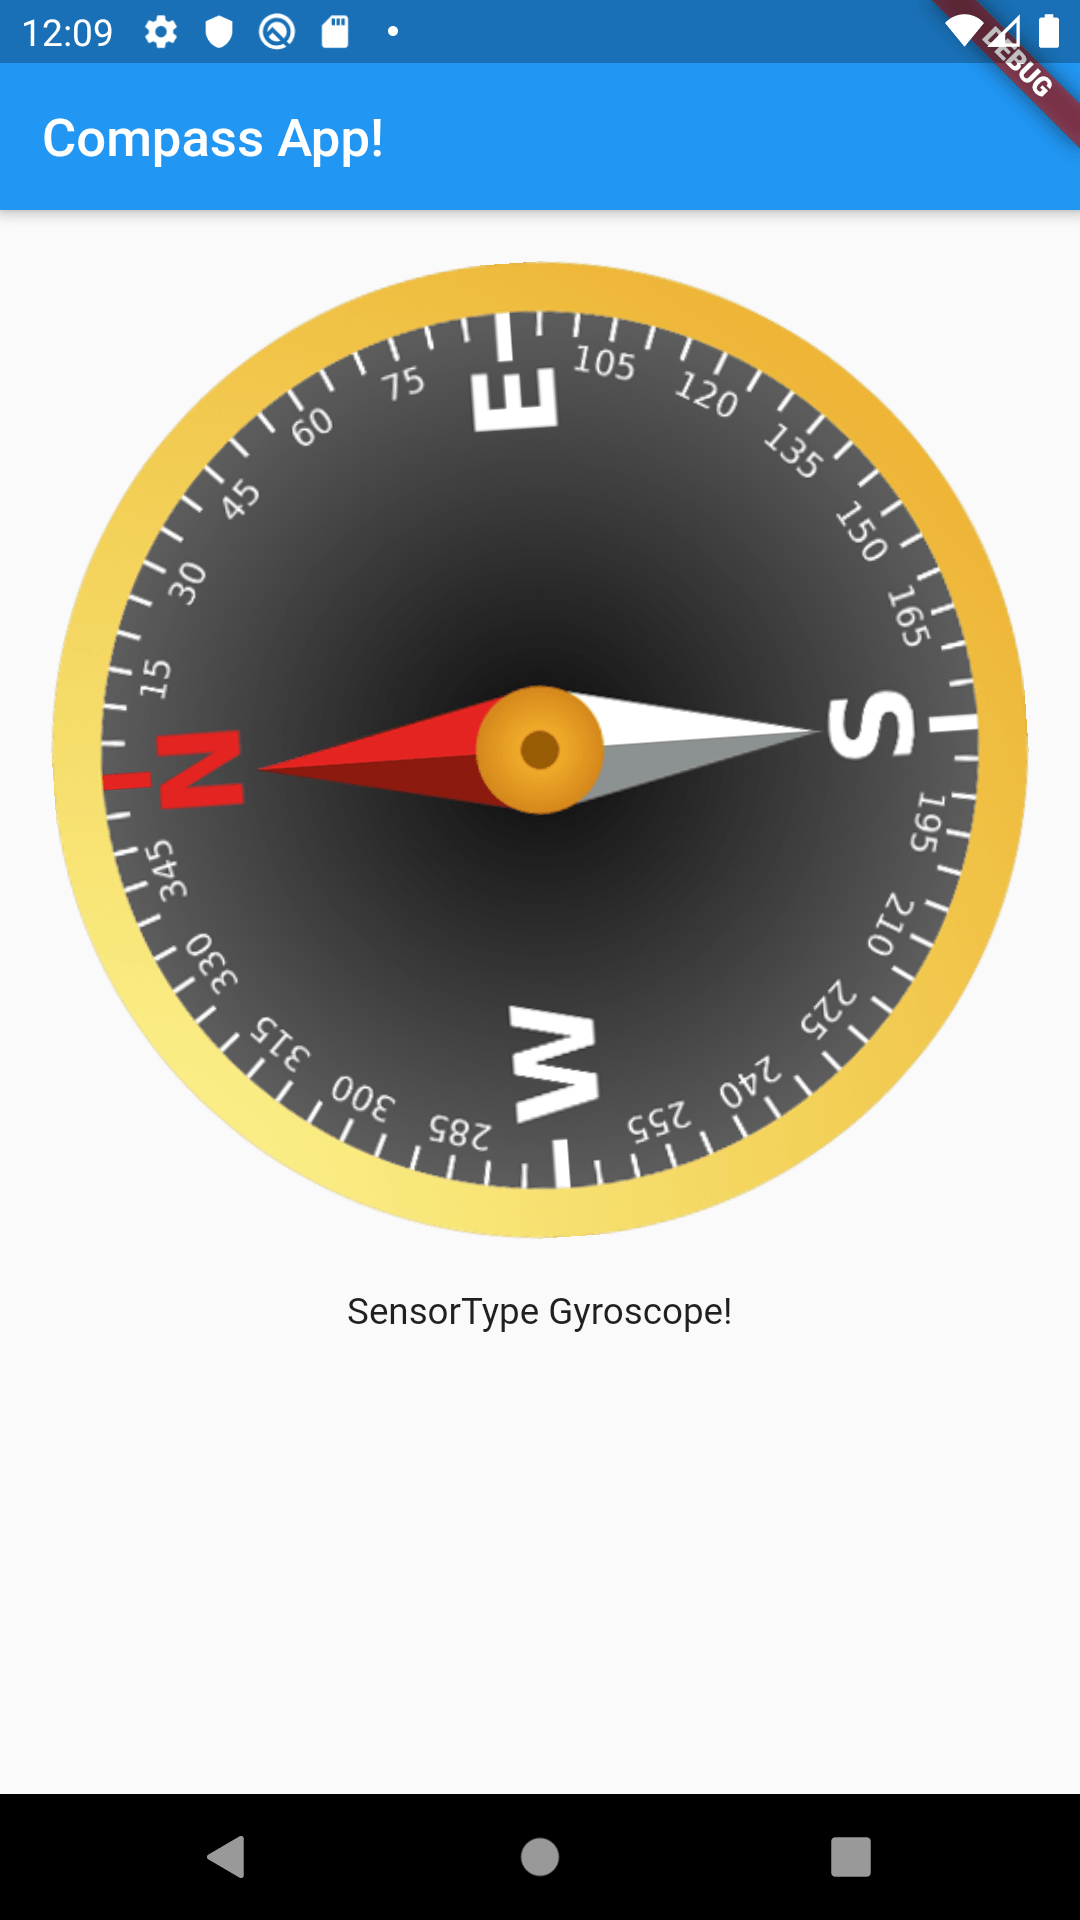 How-to create a Compass App with Flutter - Wlsdevelop